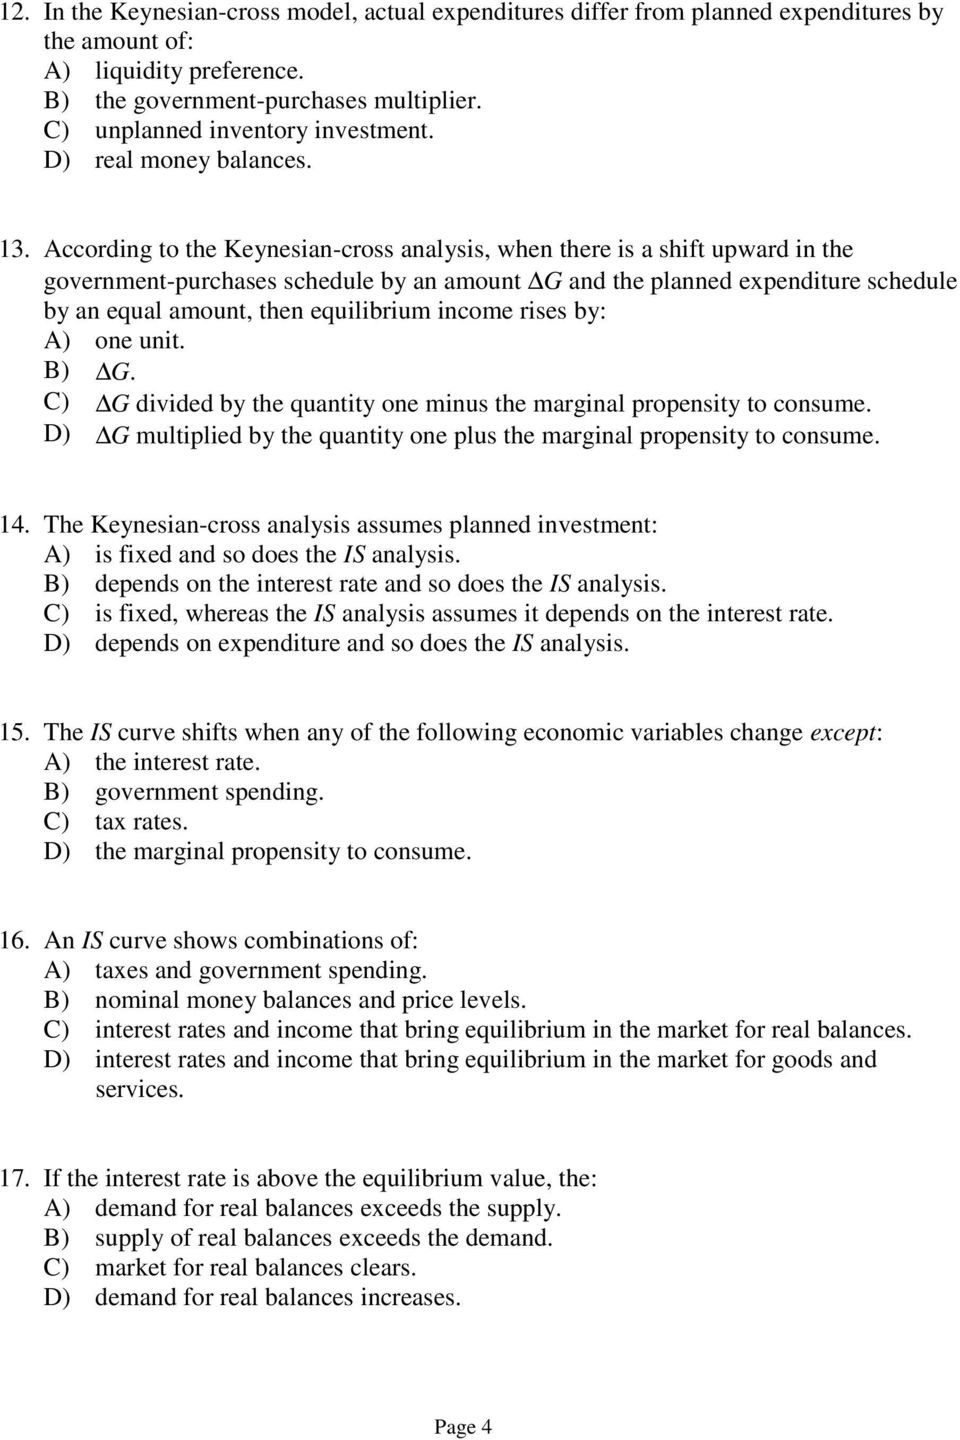 According to the Keynesian-cross analysis, when there is a shift upward in the government-purchases schedule by an amount G and the planned expenditure schedule by an equal amount, then equilibrium